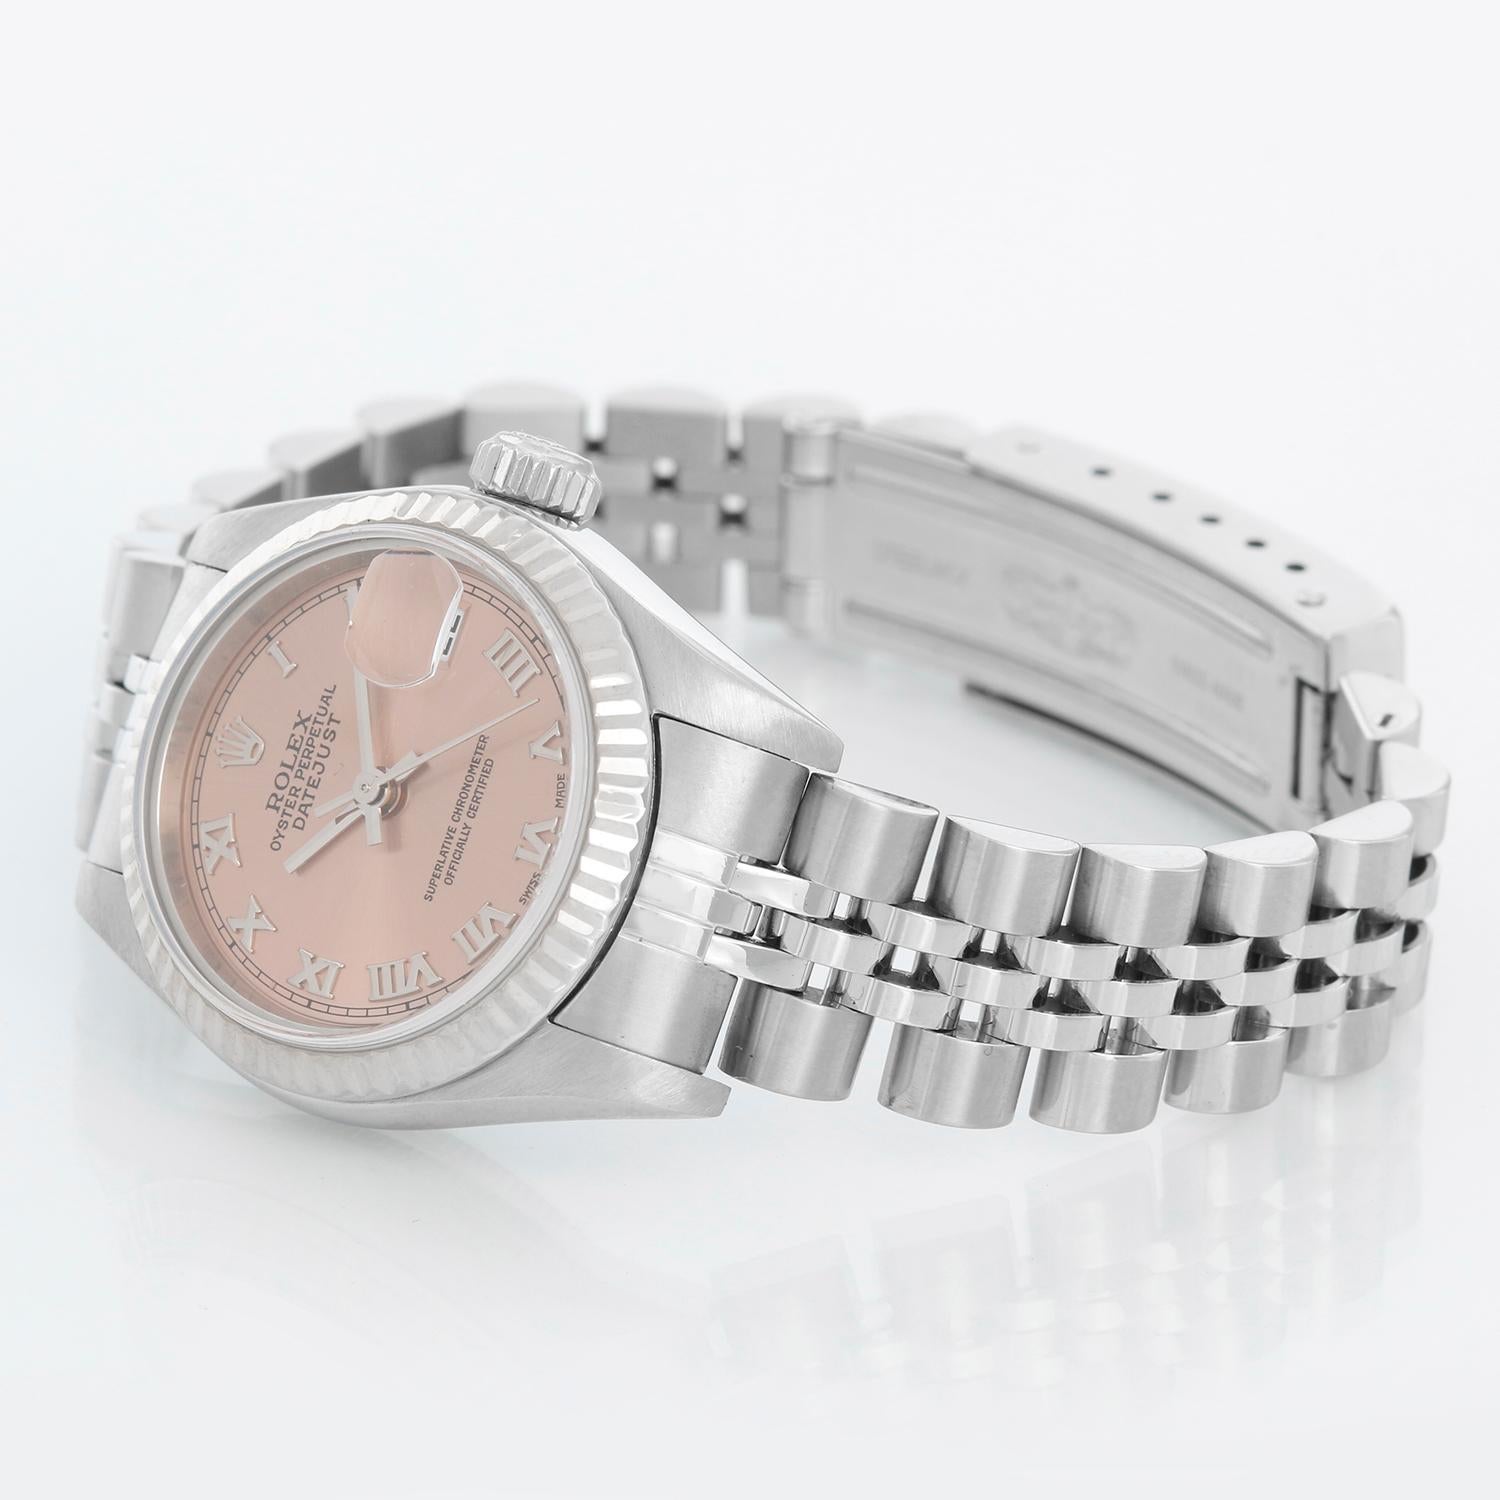 Rolex Ladies Datejust Stainless Steel Watch 79174 - Automatic winding. Stainless steel case with 18k white gold Fluted bezel (26mm diameter). Salmon dial with Roman numerals. Stainless steel Rolex jubilee bracelet. Pre-owned with custom box with